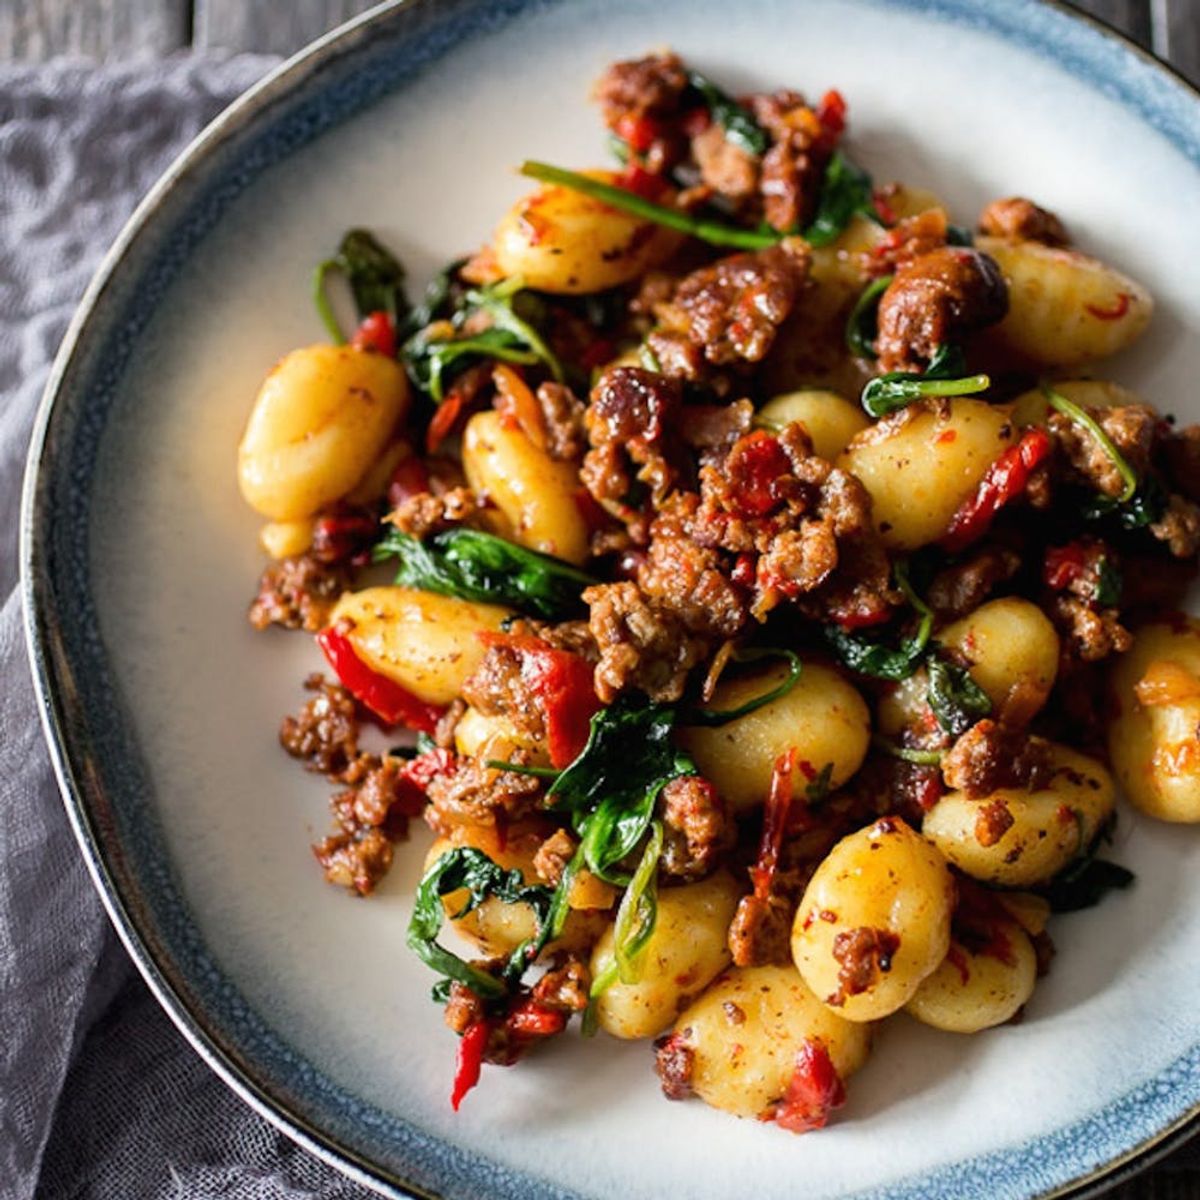 19 Gnocchi Recipes to Comfort You on Chilly Nights